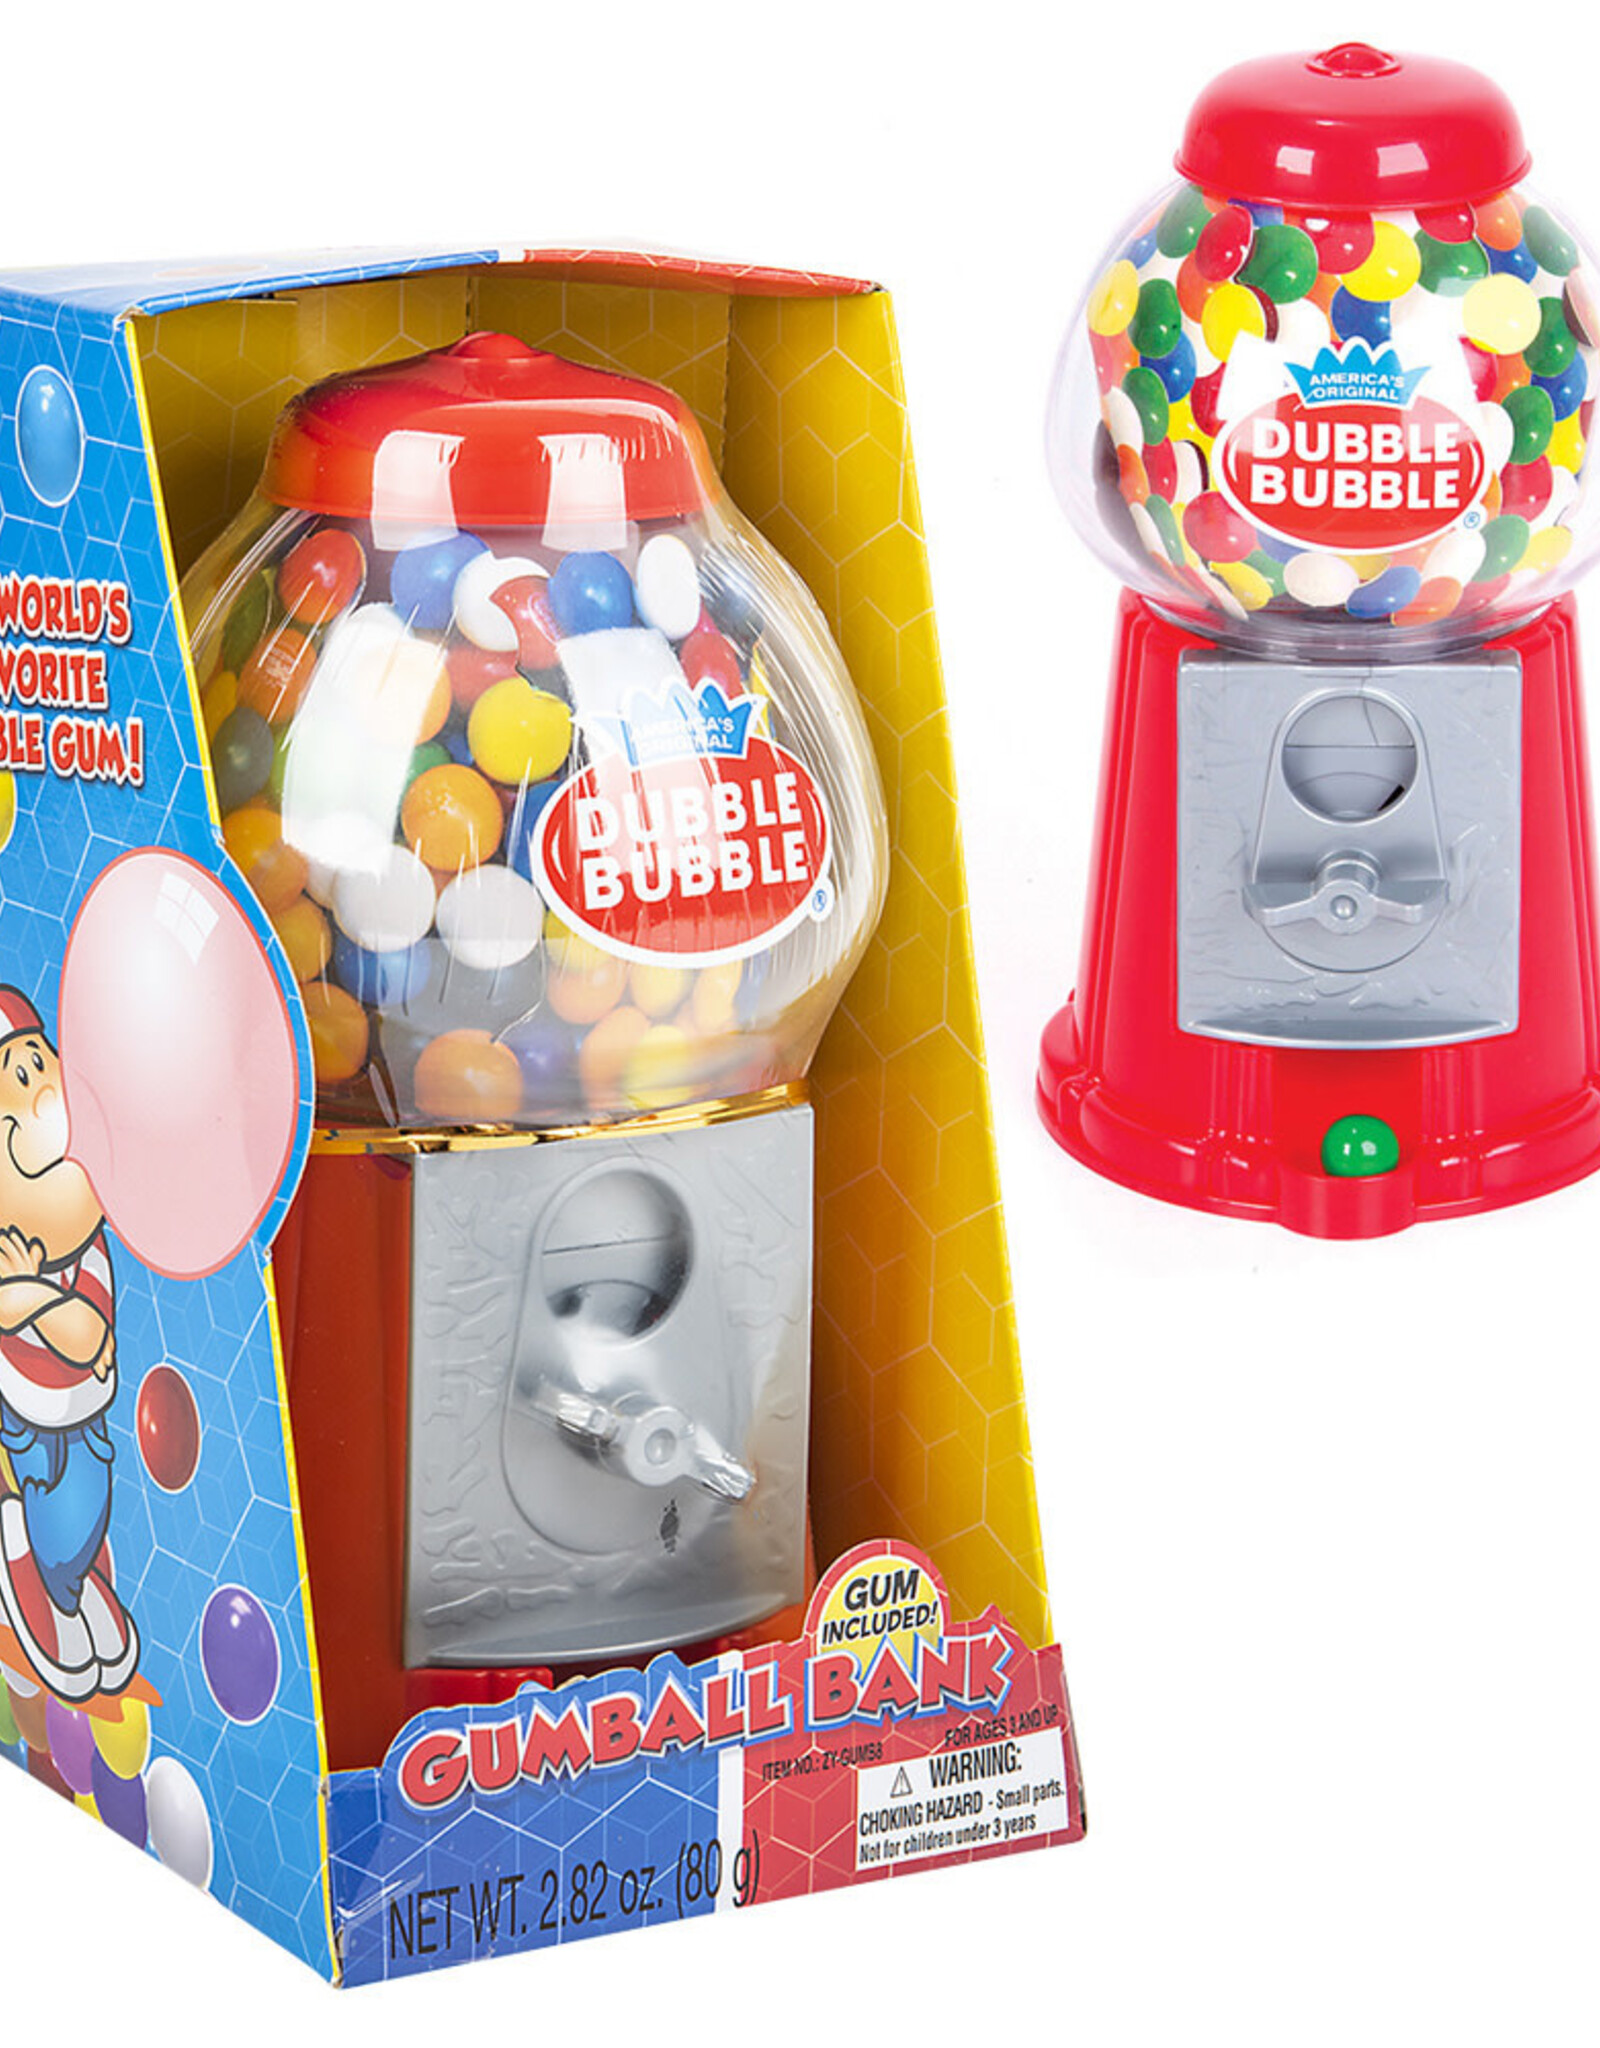 TOY NETWORK 8.50"CLASSIC GUMBALL BANK